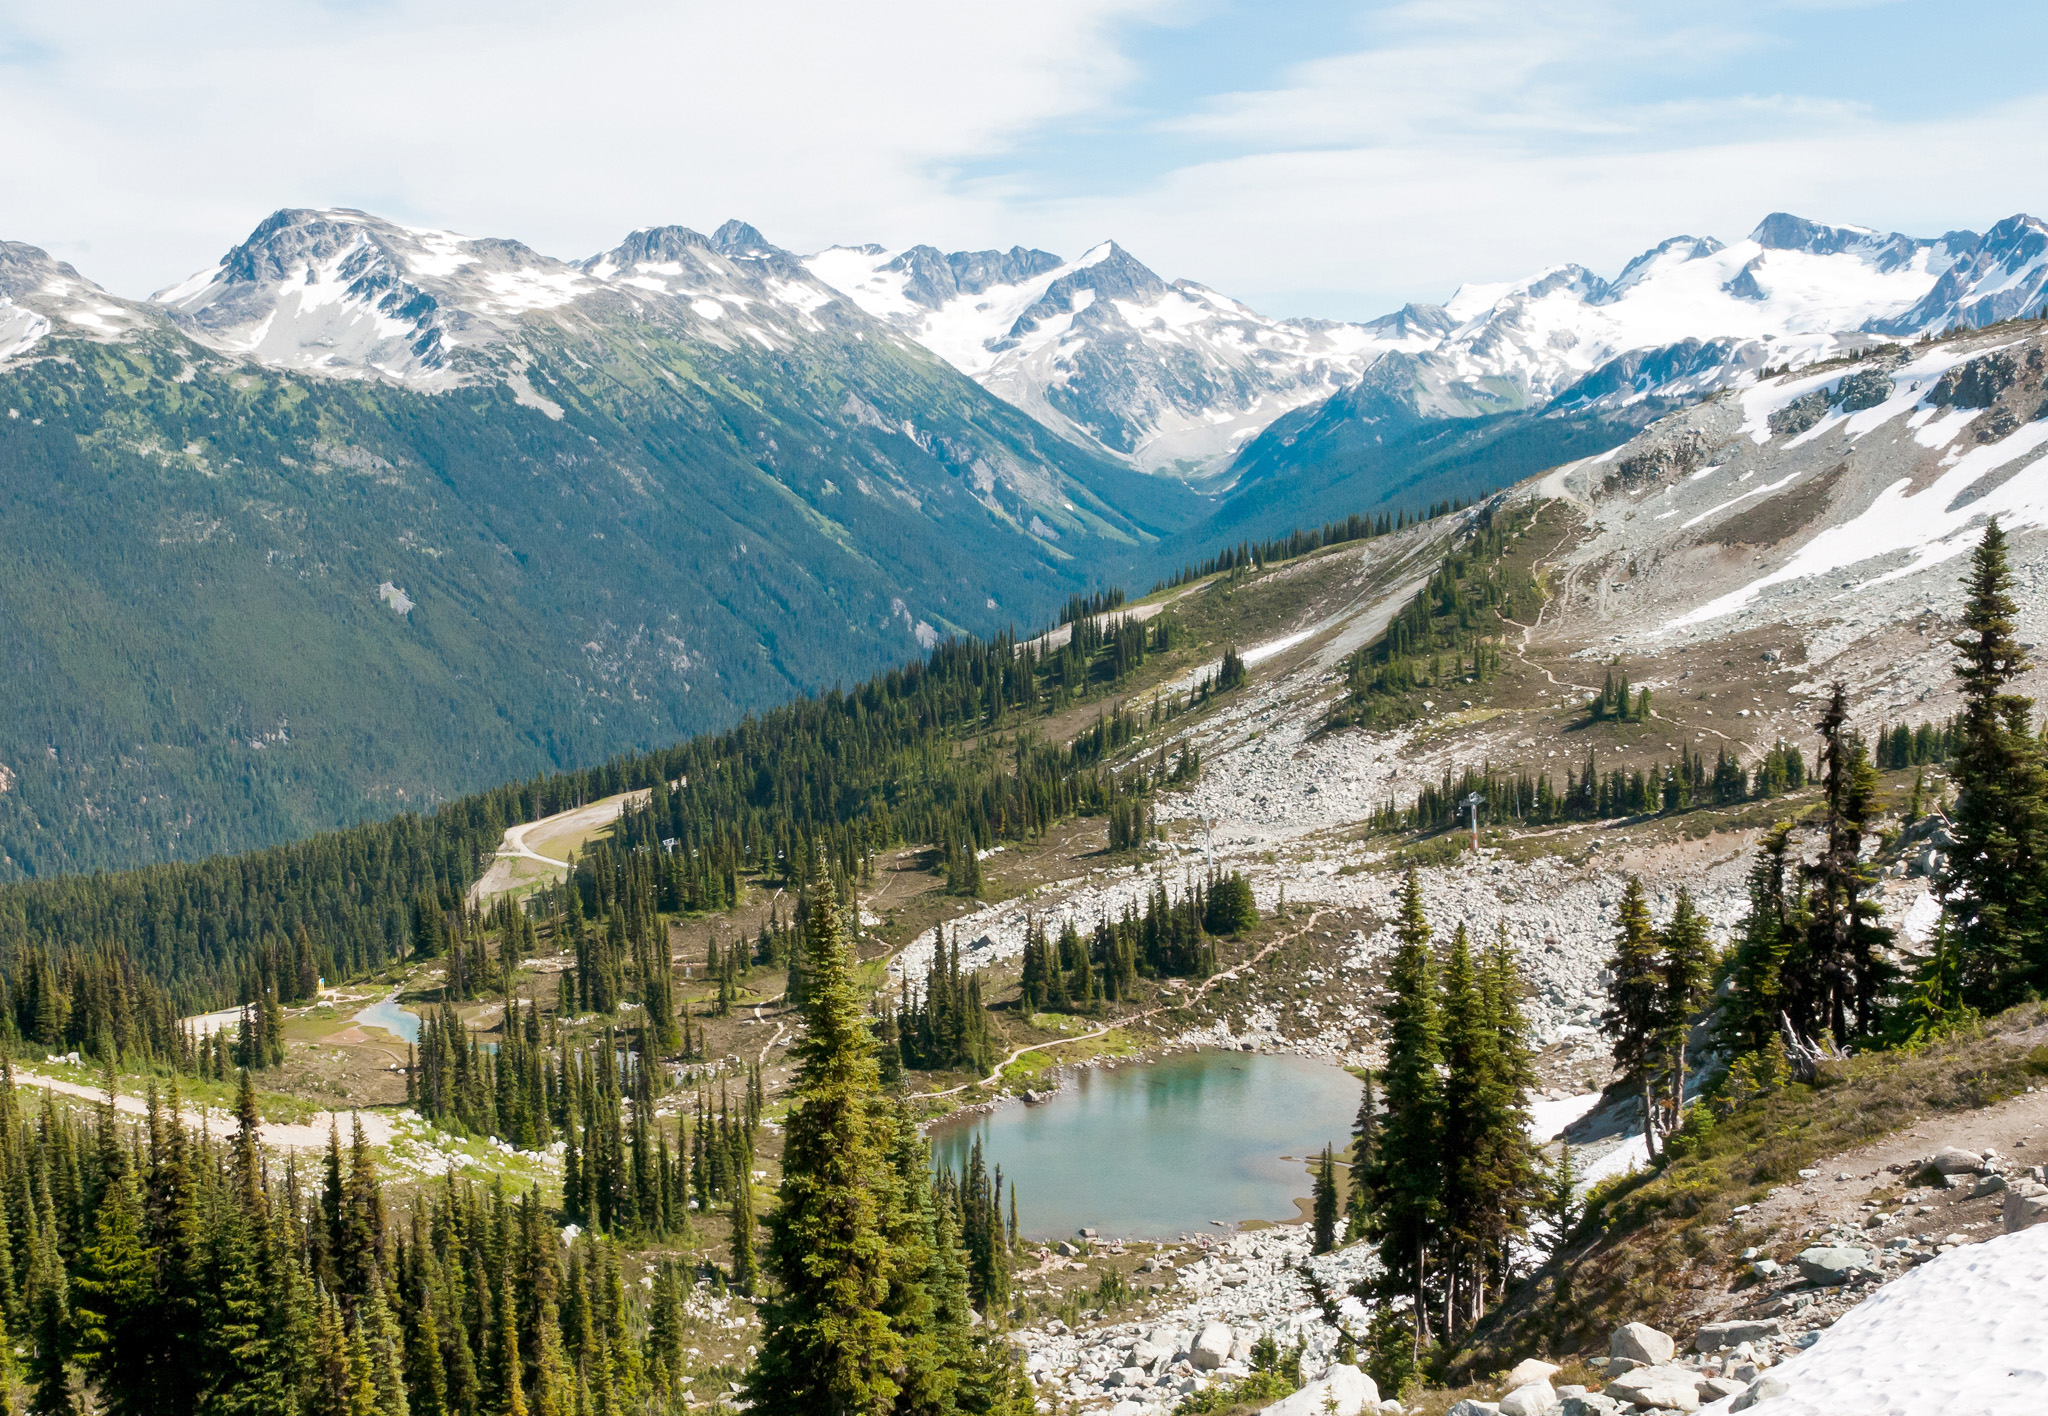 Sublime mountain scenery can be found in Whistler just a short drive from - photo 6